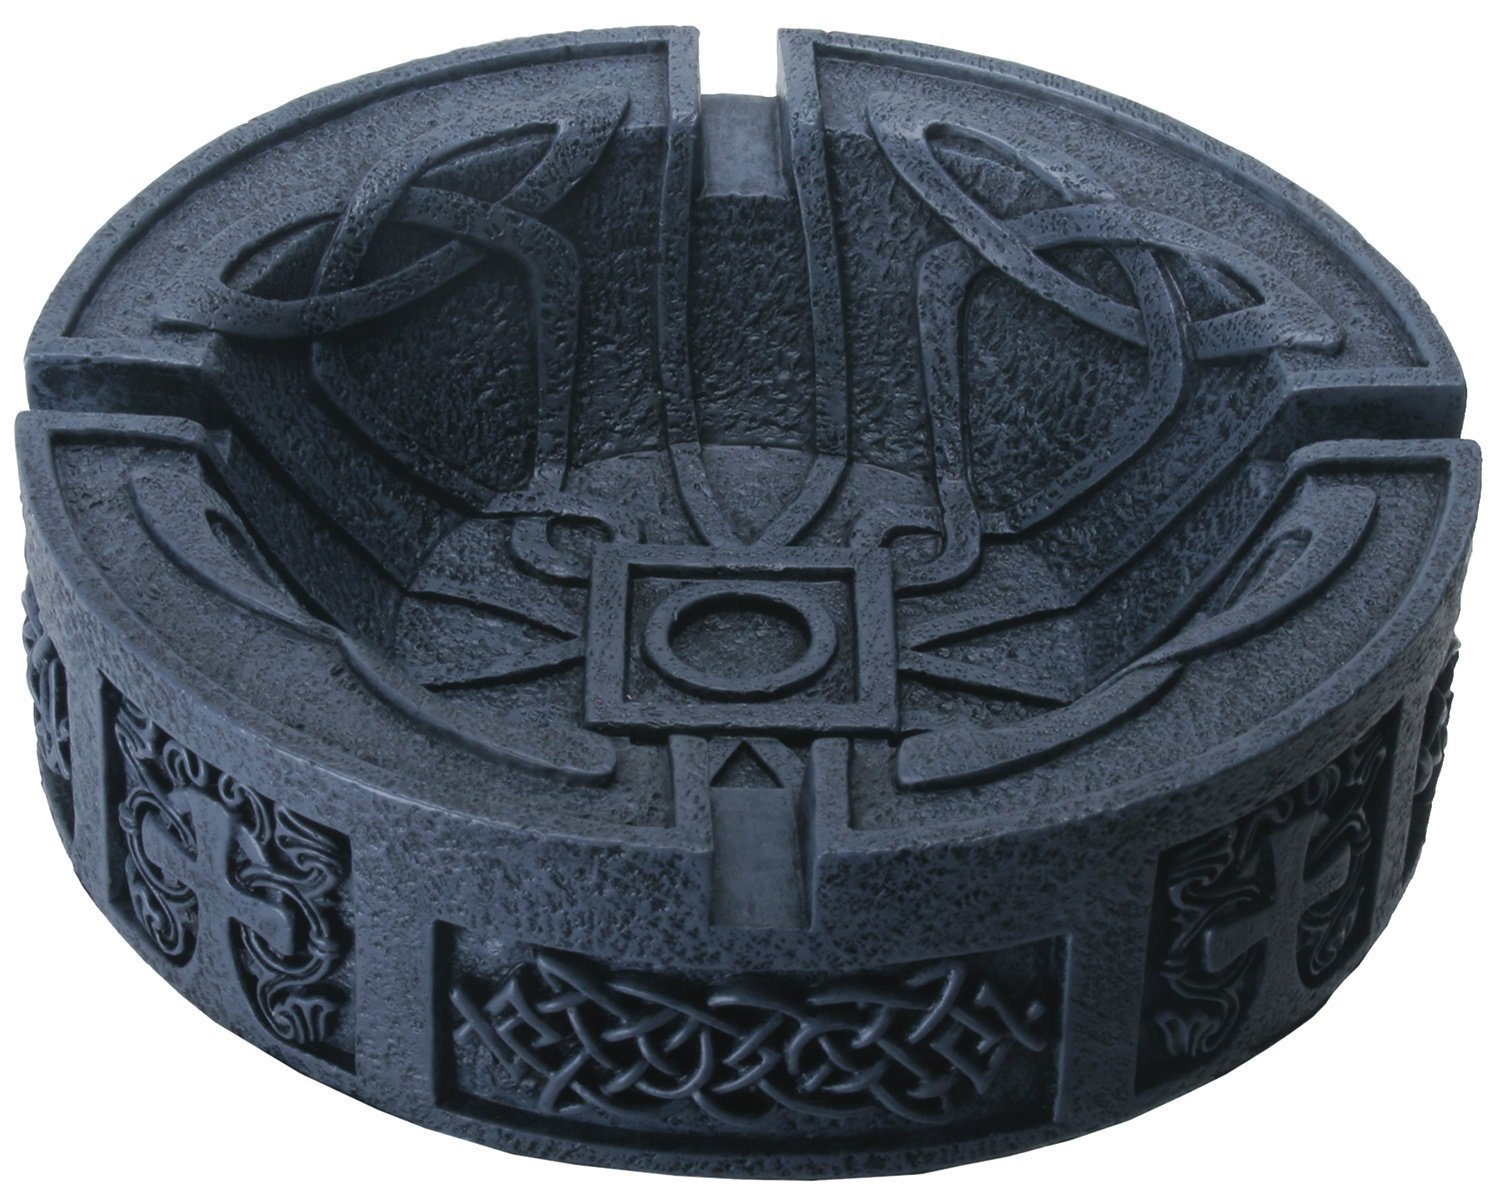 5.25 Inch Cigar Ashtray with Celtic Engravings, Grey Colored